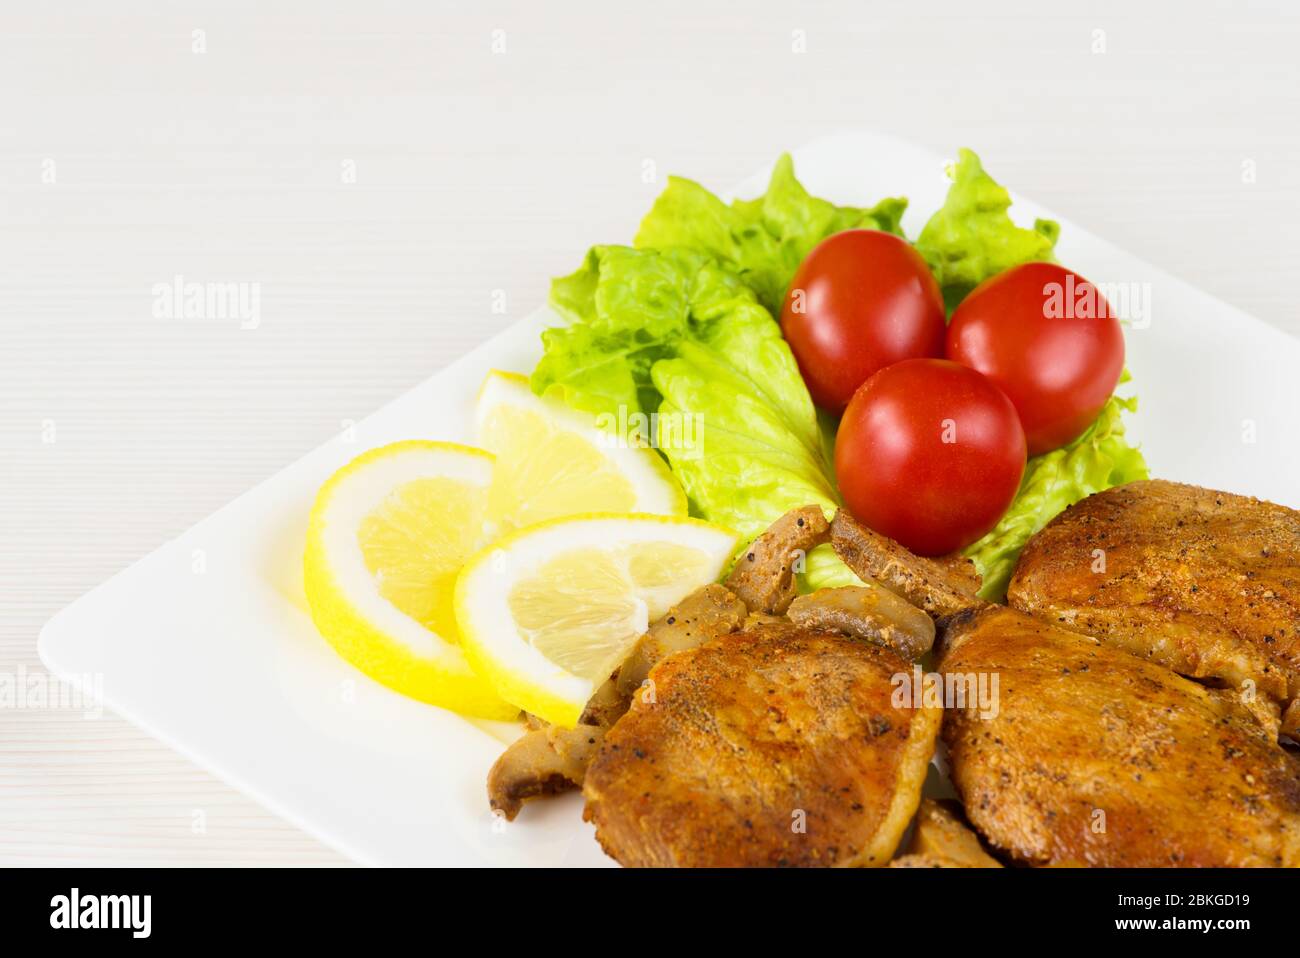 Pork fillet steak with cherry tomatoes, lemon and a lettuce in white dish on white background. Stock Photo